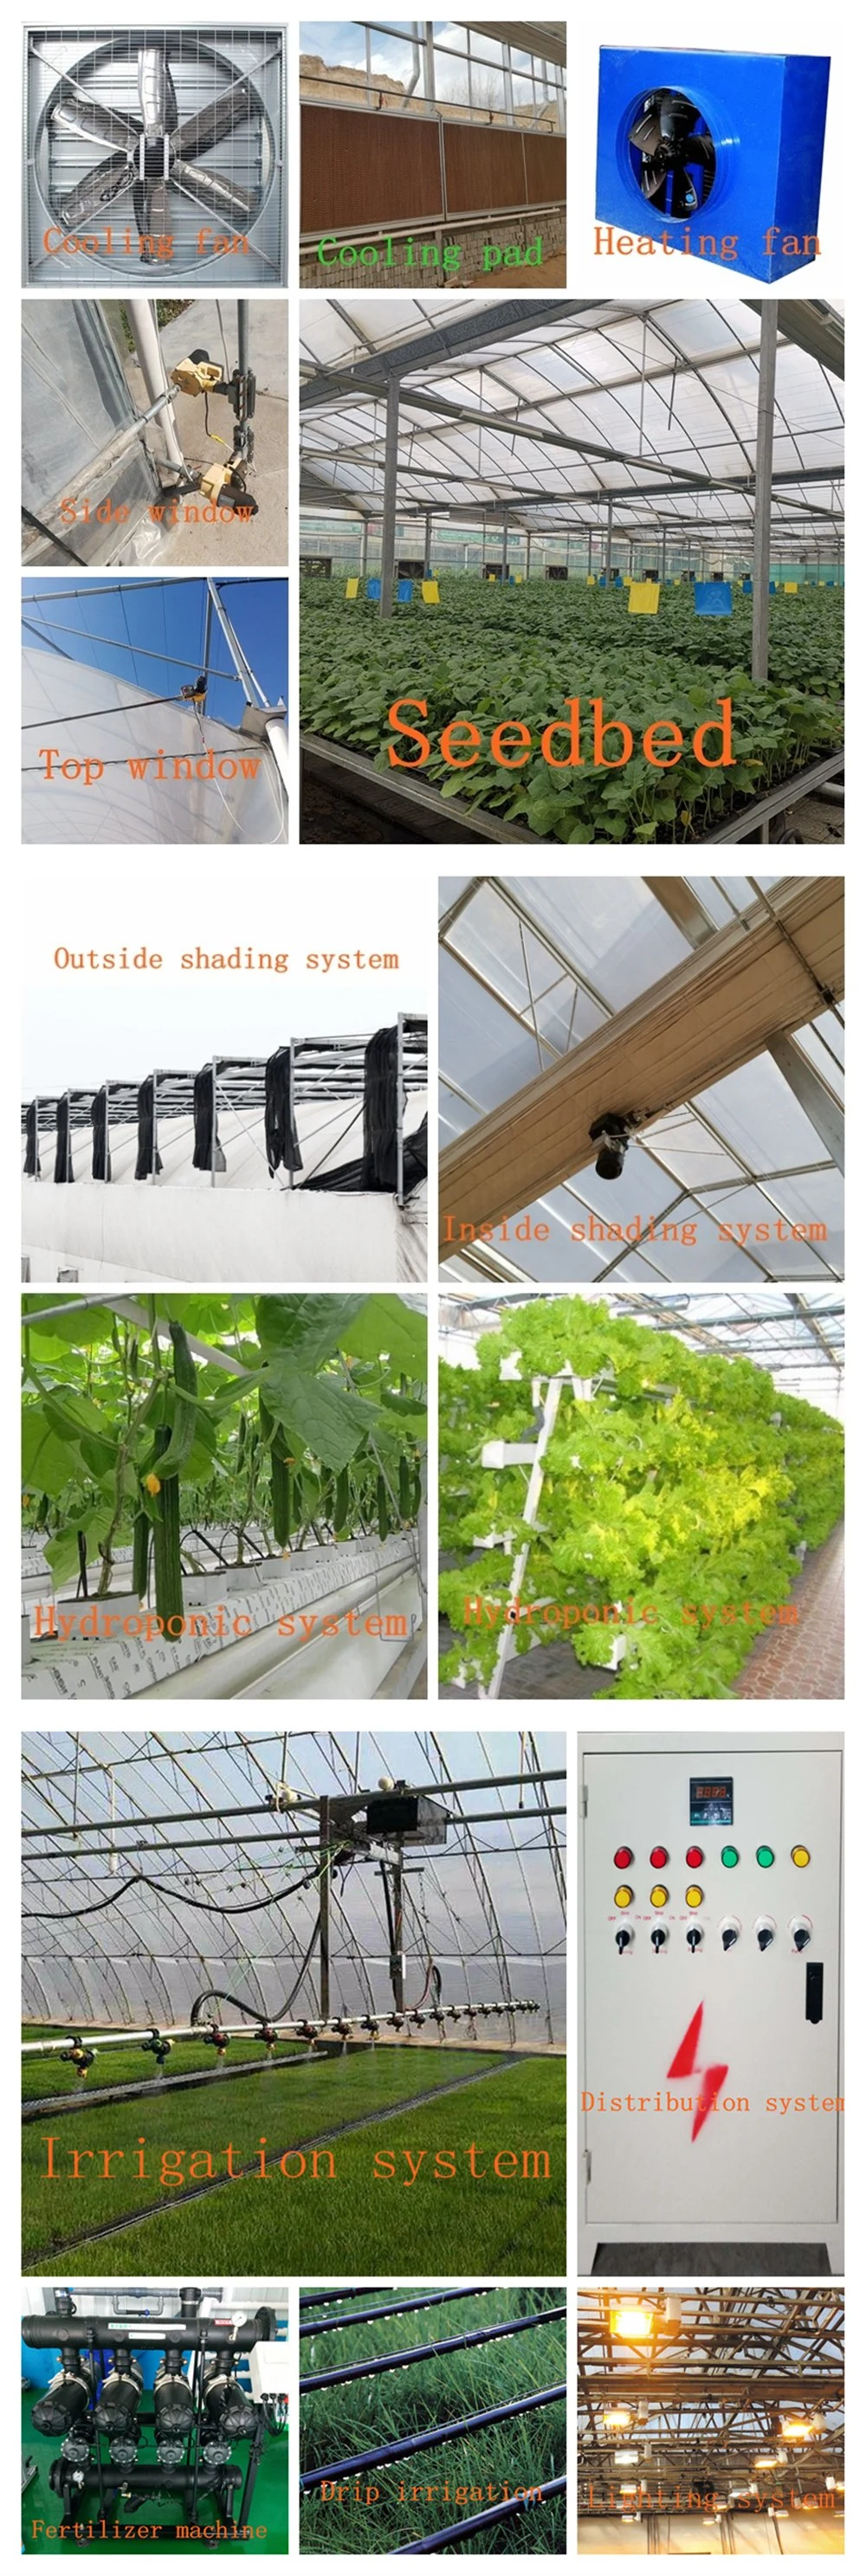 Complete Arch Hydroponics Plastic Film Multifunctional Agriculture Greenhouse for Strawberry/Cucumber/Tomato